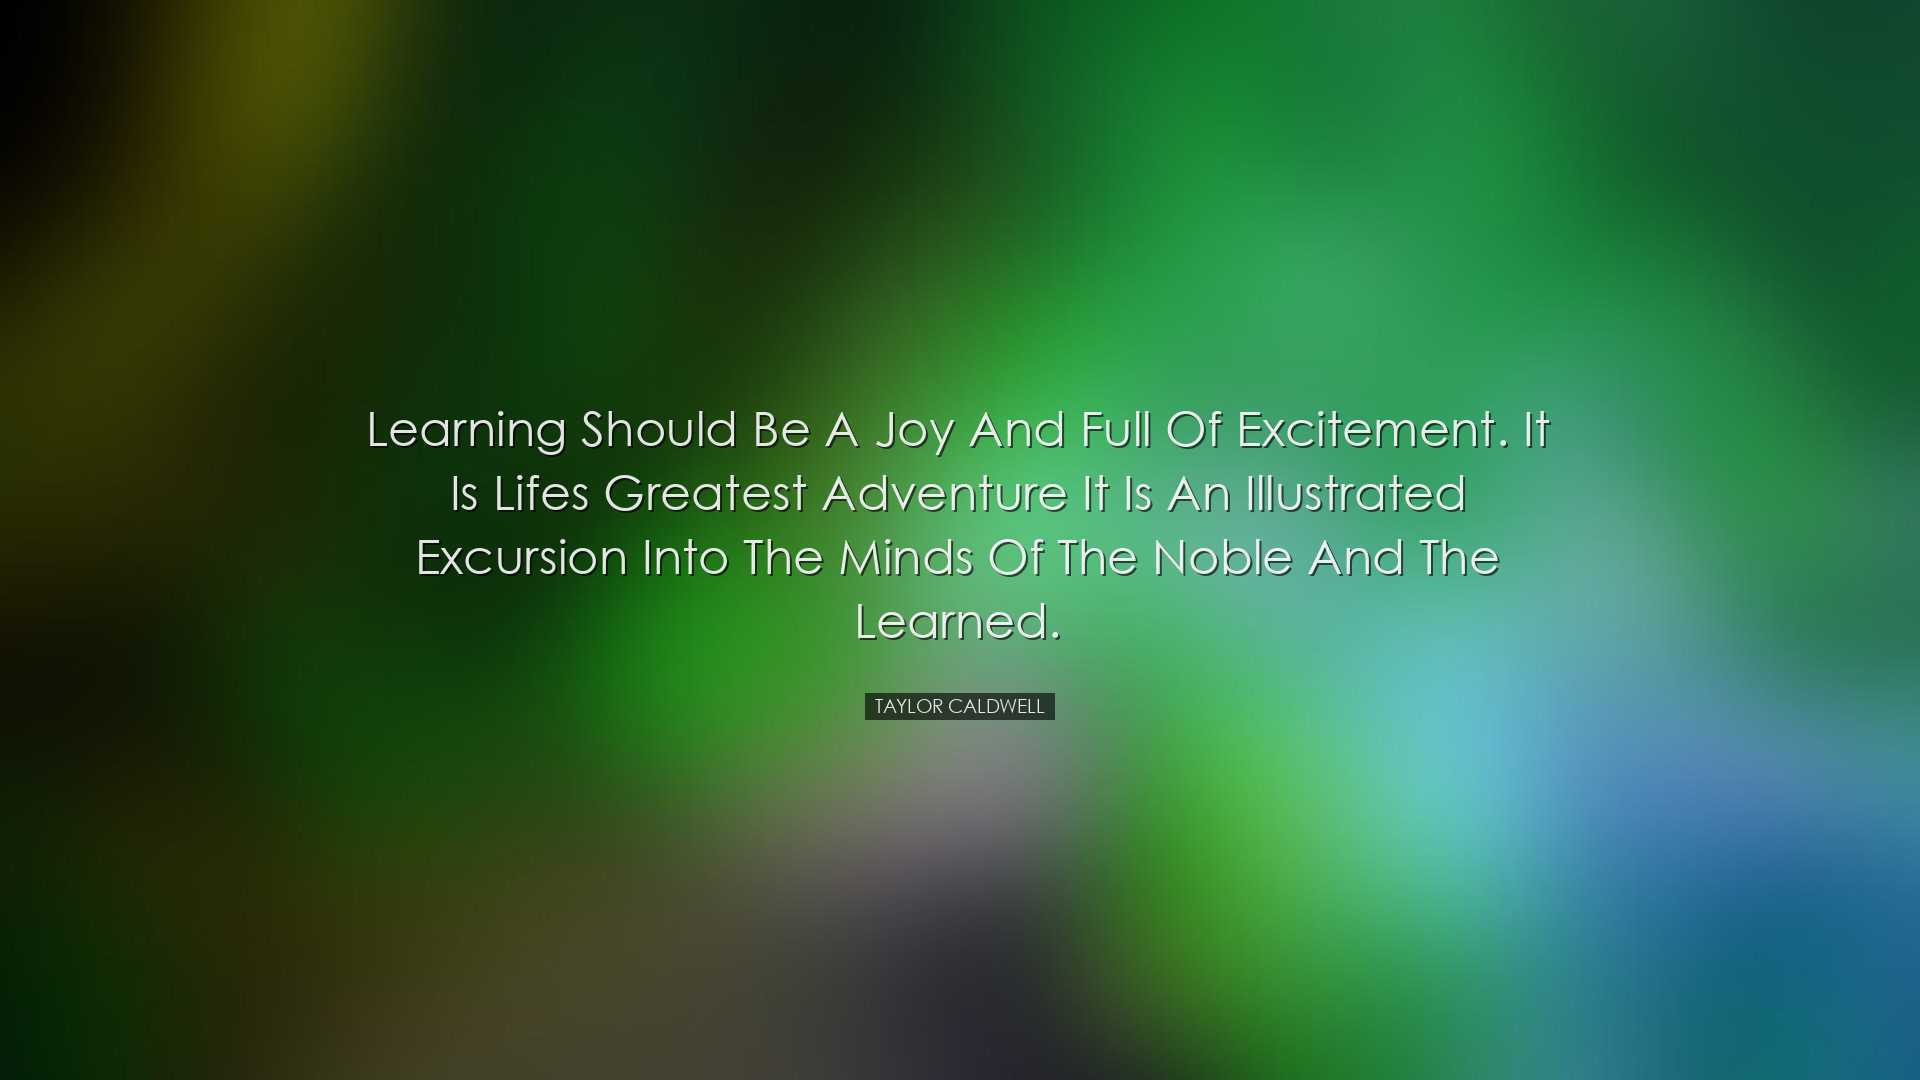 Learning should be a joy and full of excitement. It is lifes great